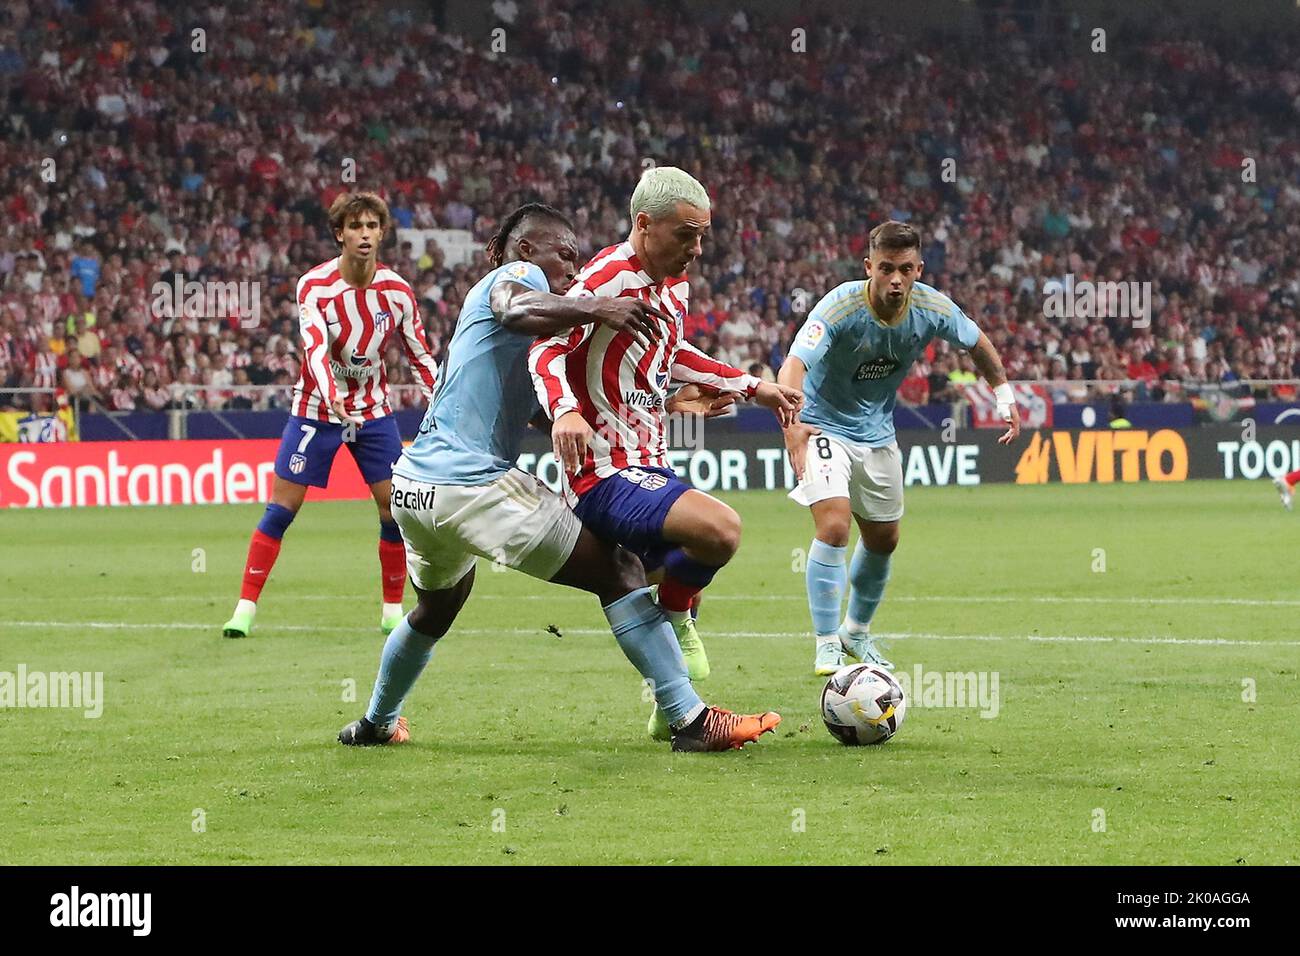 Madrid, Spain. 10th Sep, 2022. Atletico´s Griezmann in action during La Liga match day 5 between Atletico de Madrid and Celta at Civitas Metropolitano Stadium in Madrid, Spain, on September 10, 2022. Credit: Edward F. Peters/Alamy Live News Stock Photo